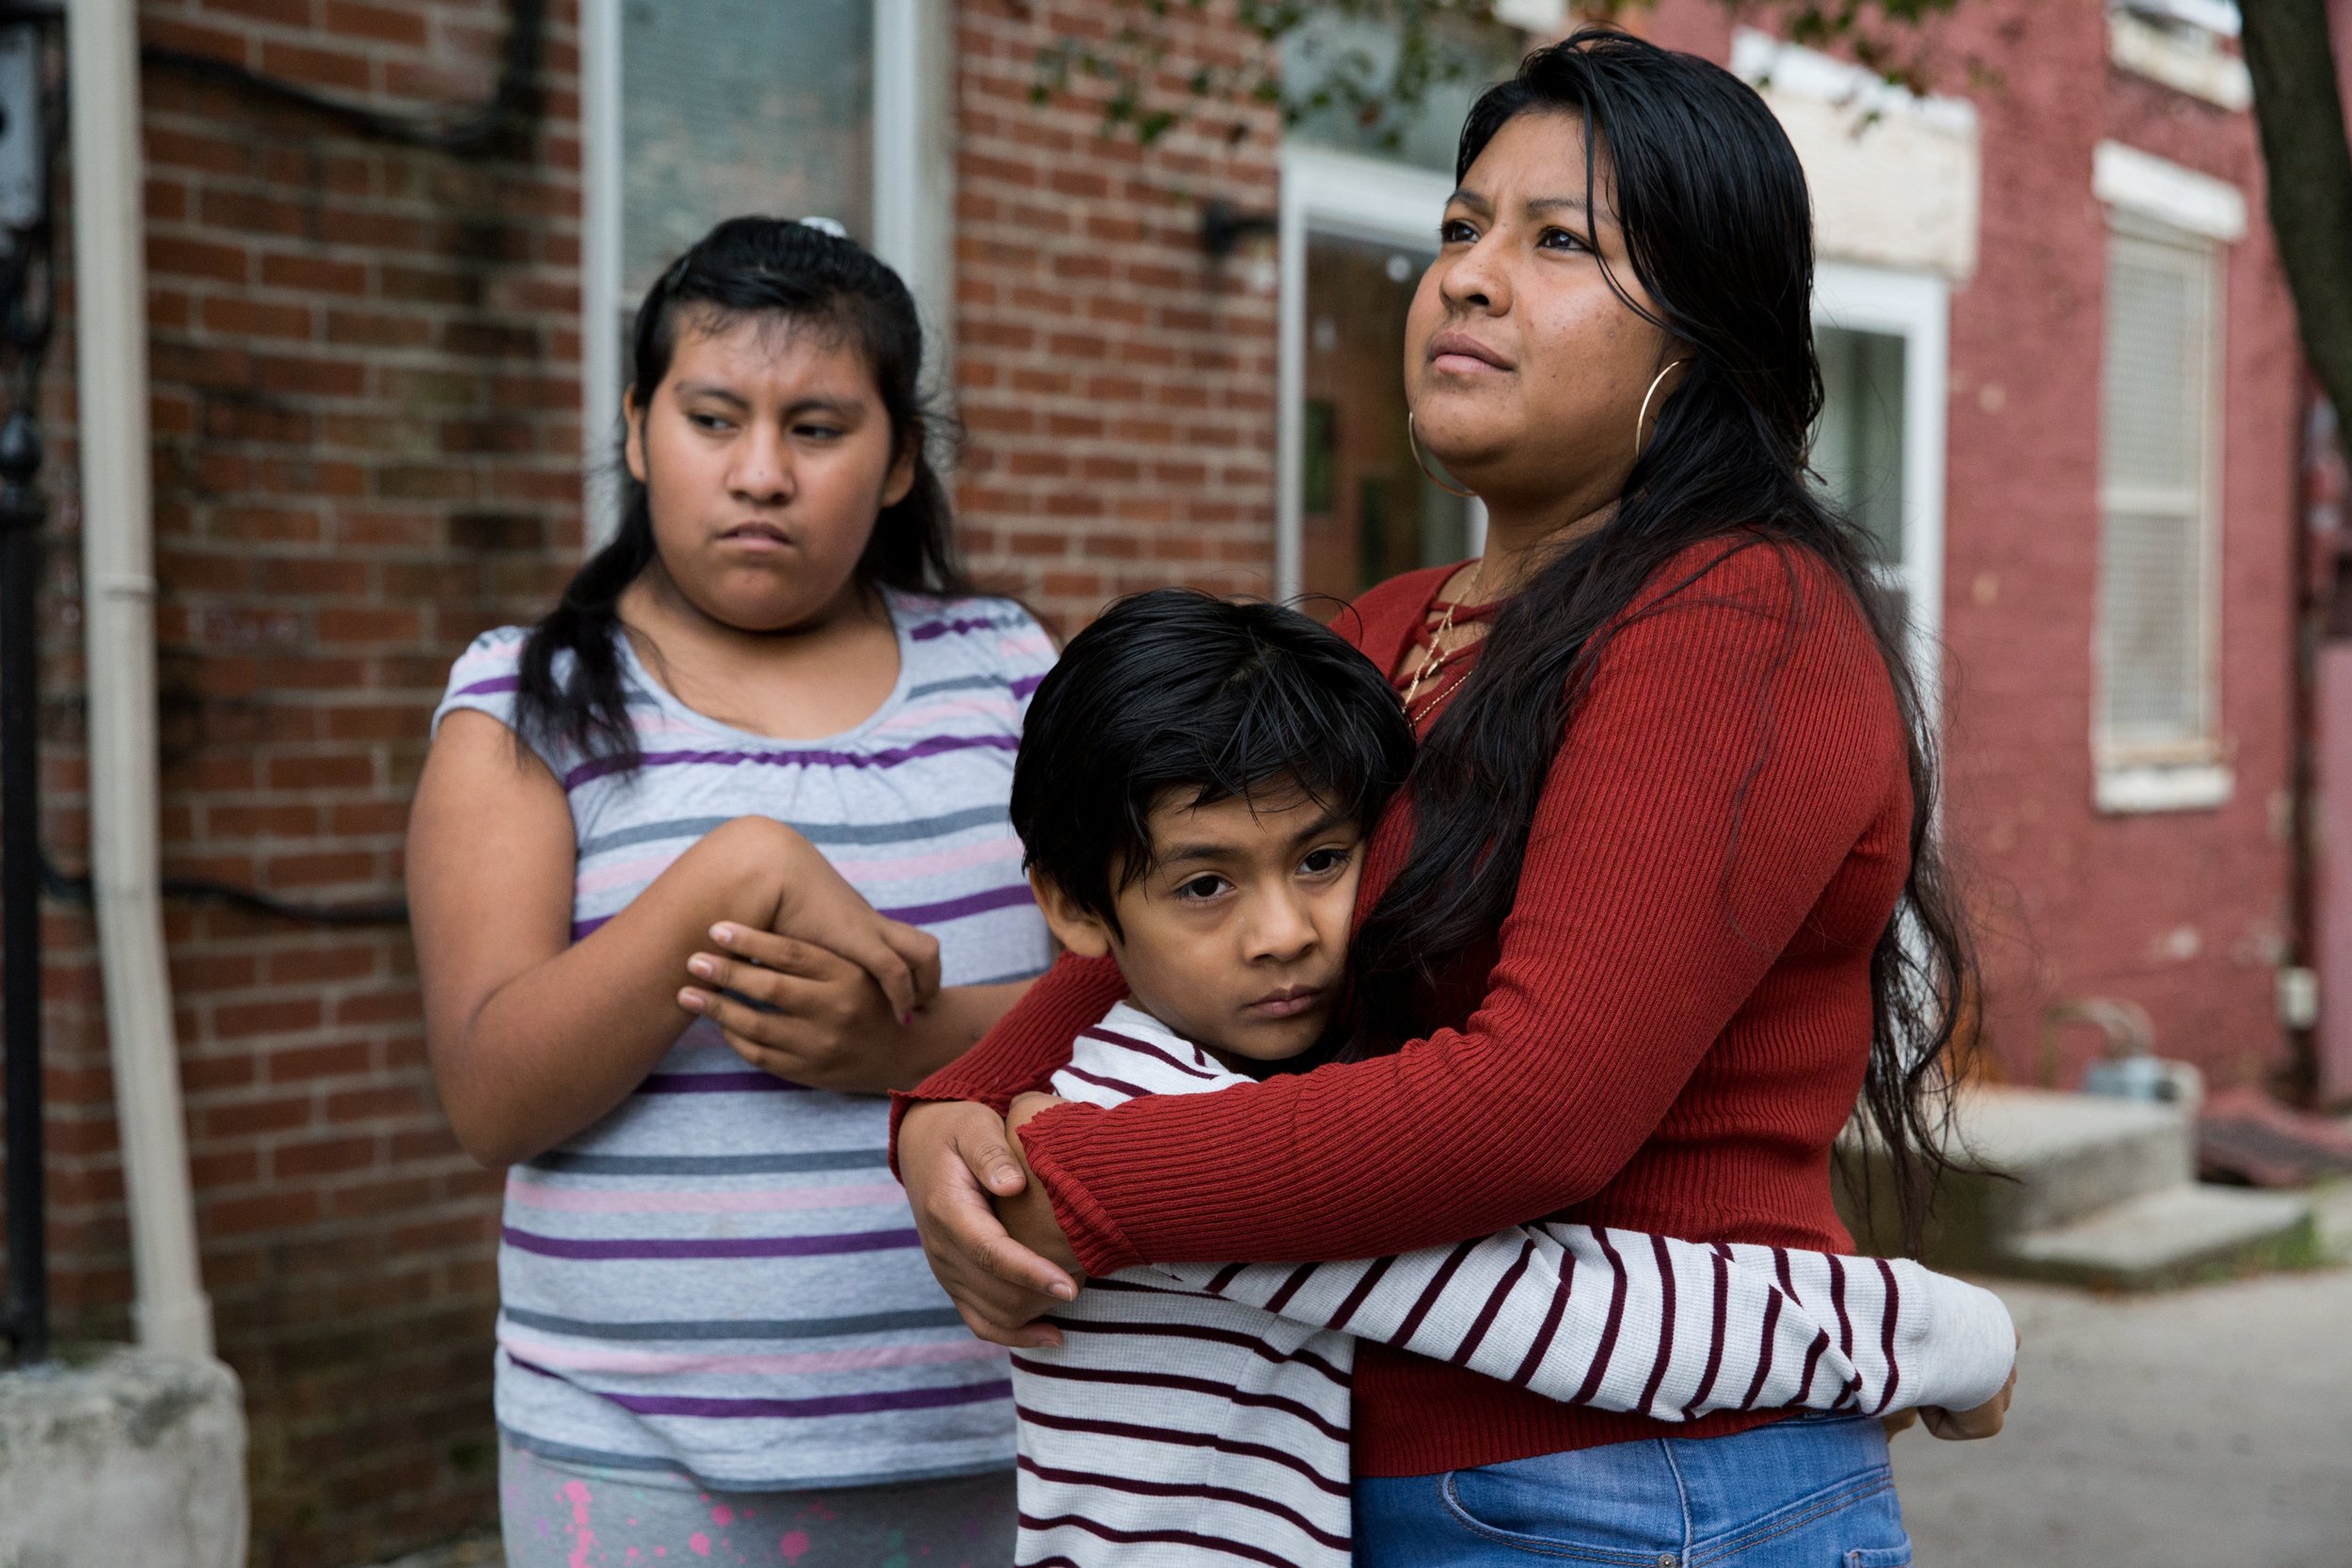  Belén Cruz stands with her children Natalie, 12, and Carlos, 8, outside of their home in York, Pennsylvania on September 18, 2020. Natalie has had trouble logging in to her school's online learning platform, and Carlos has not yet received a laptop 